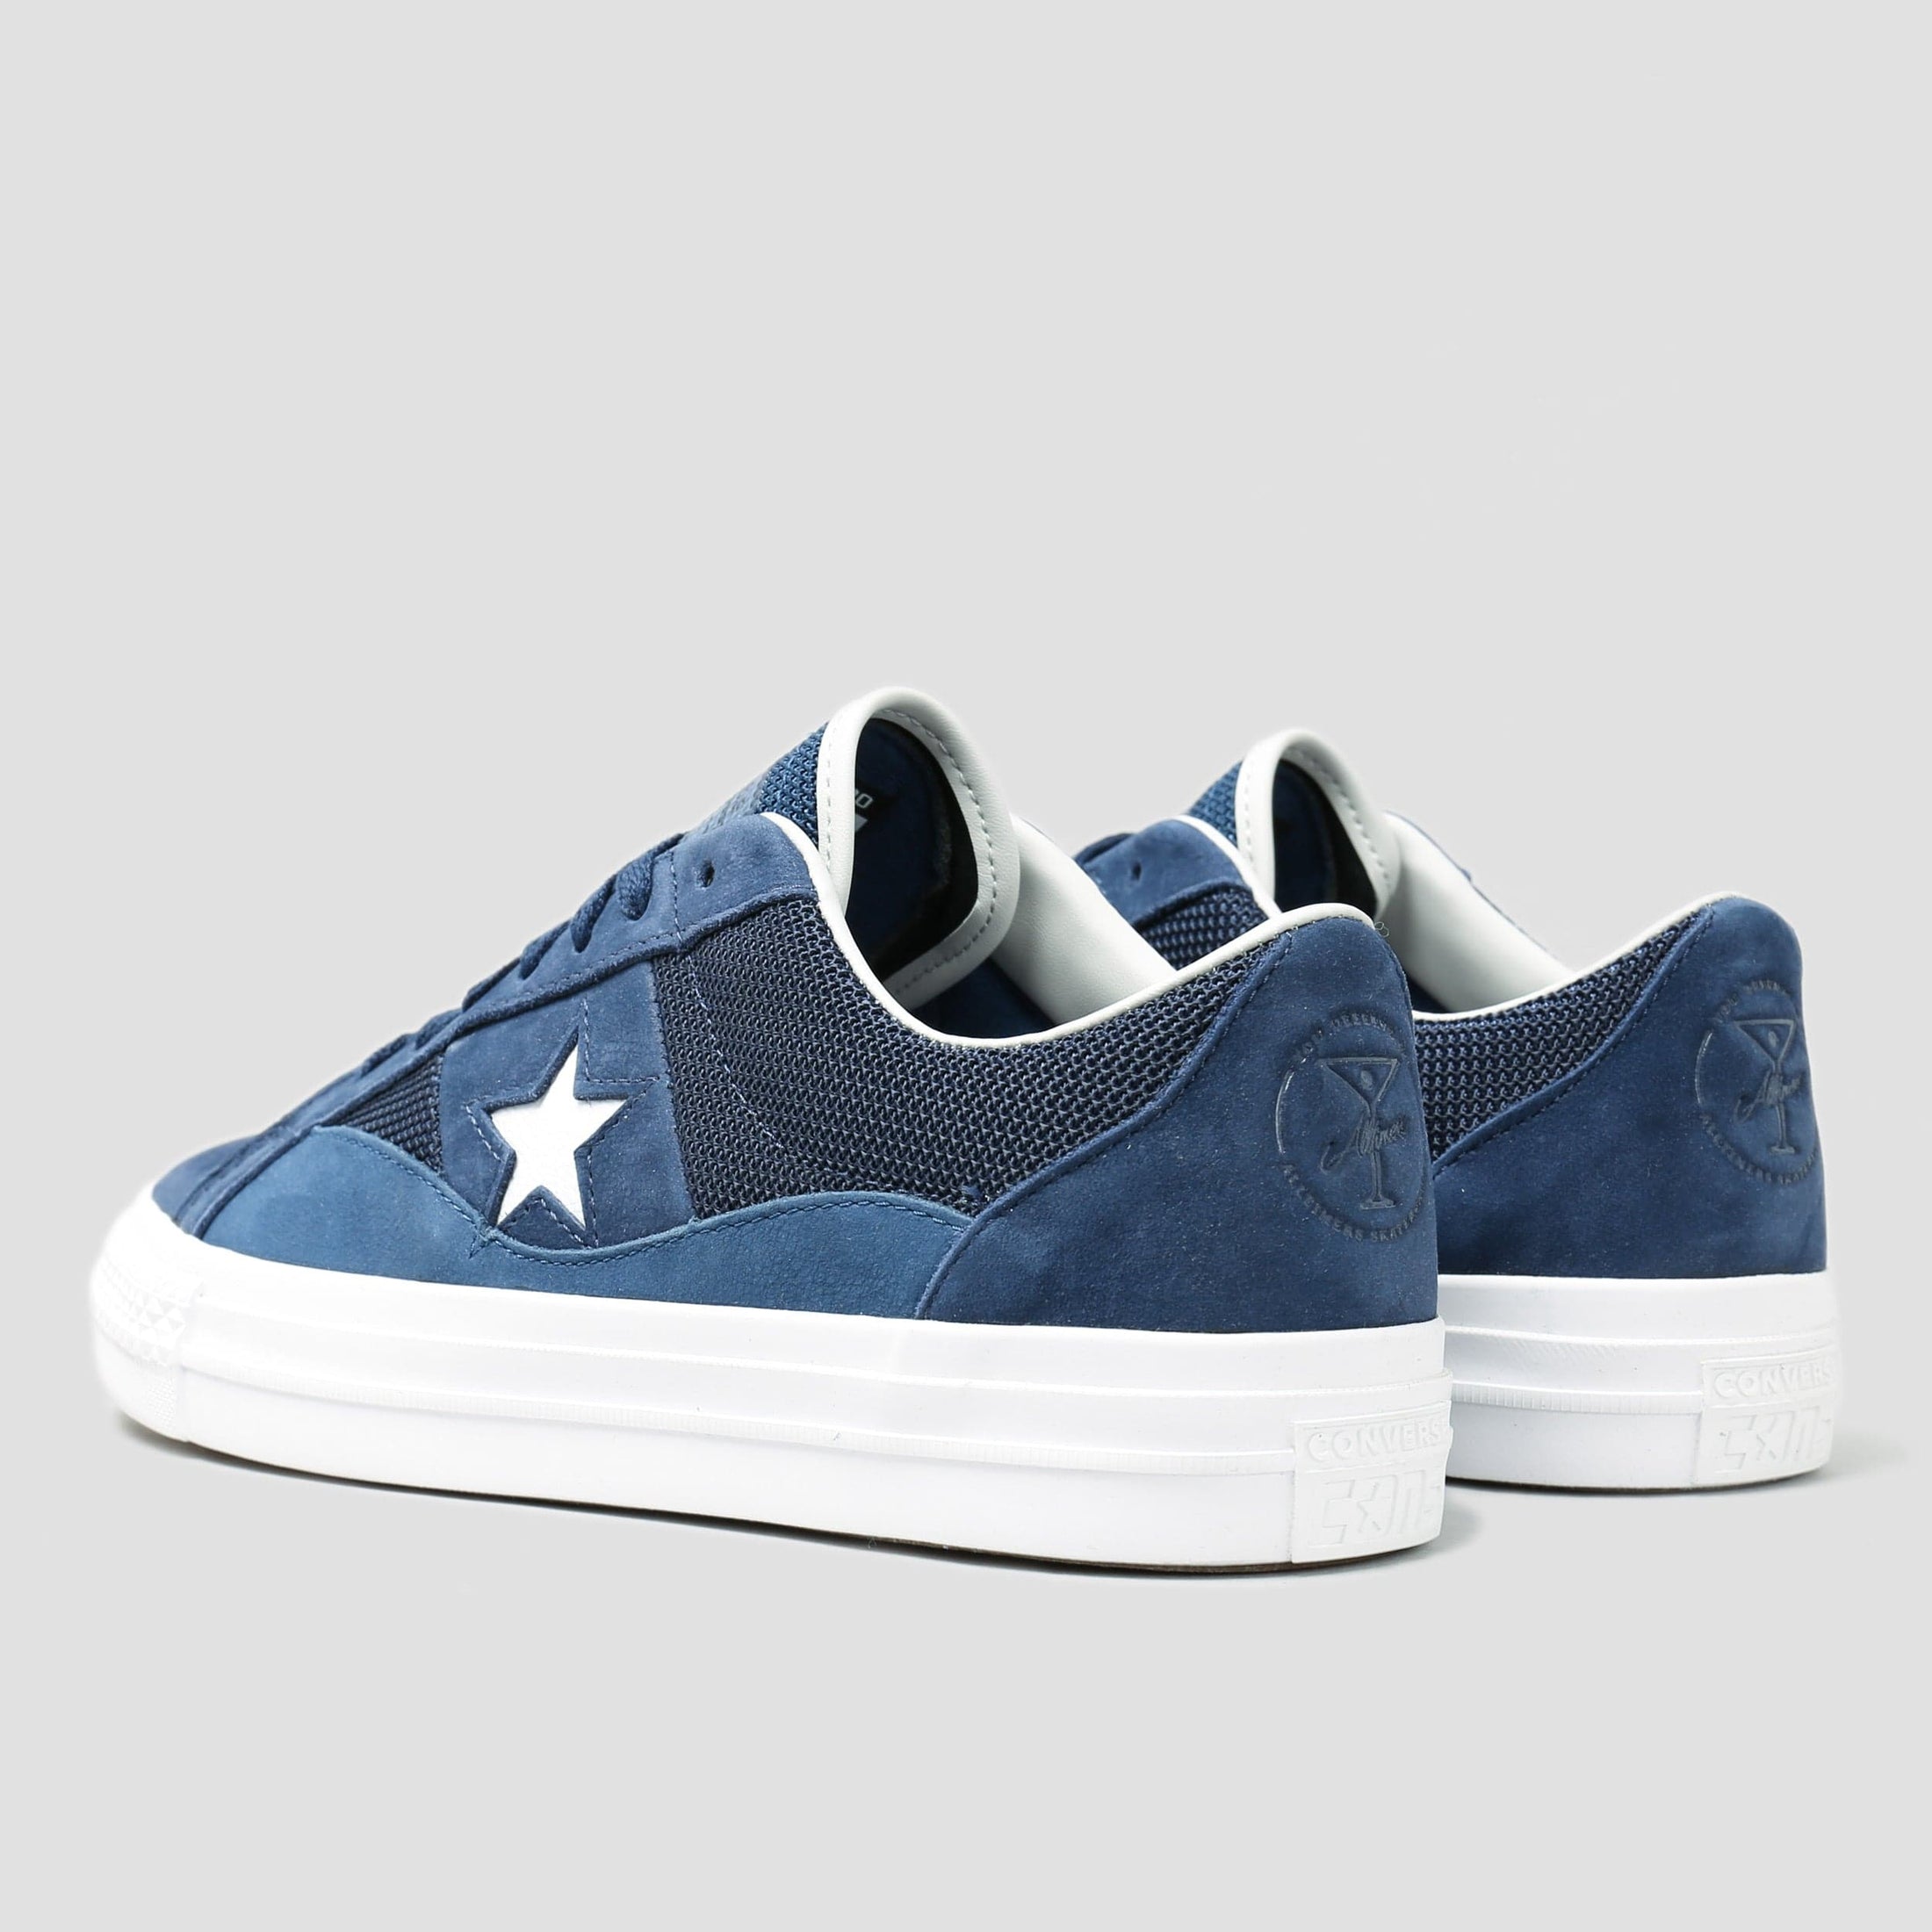 Converse X Alltimers One Star Pro Shoes Midnight Navy / Navy